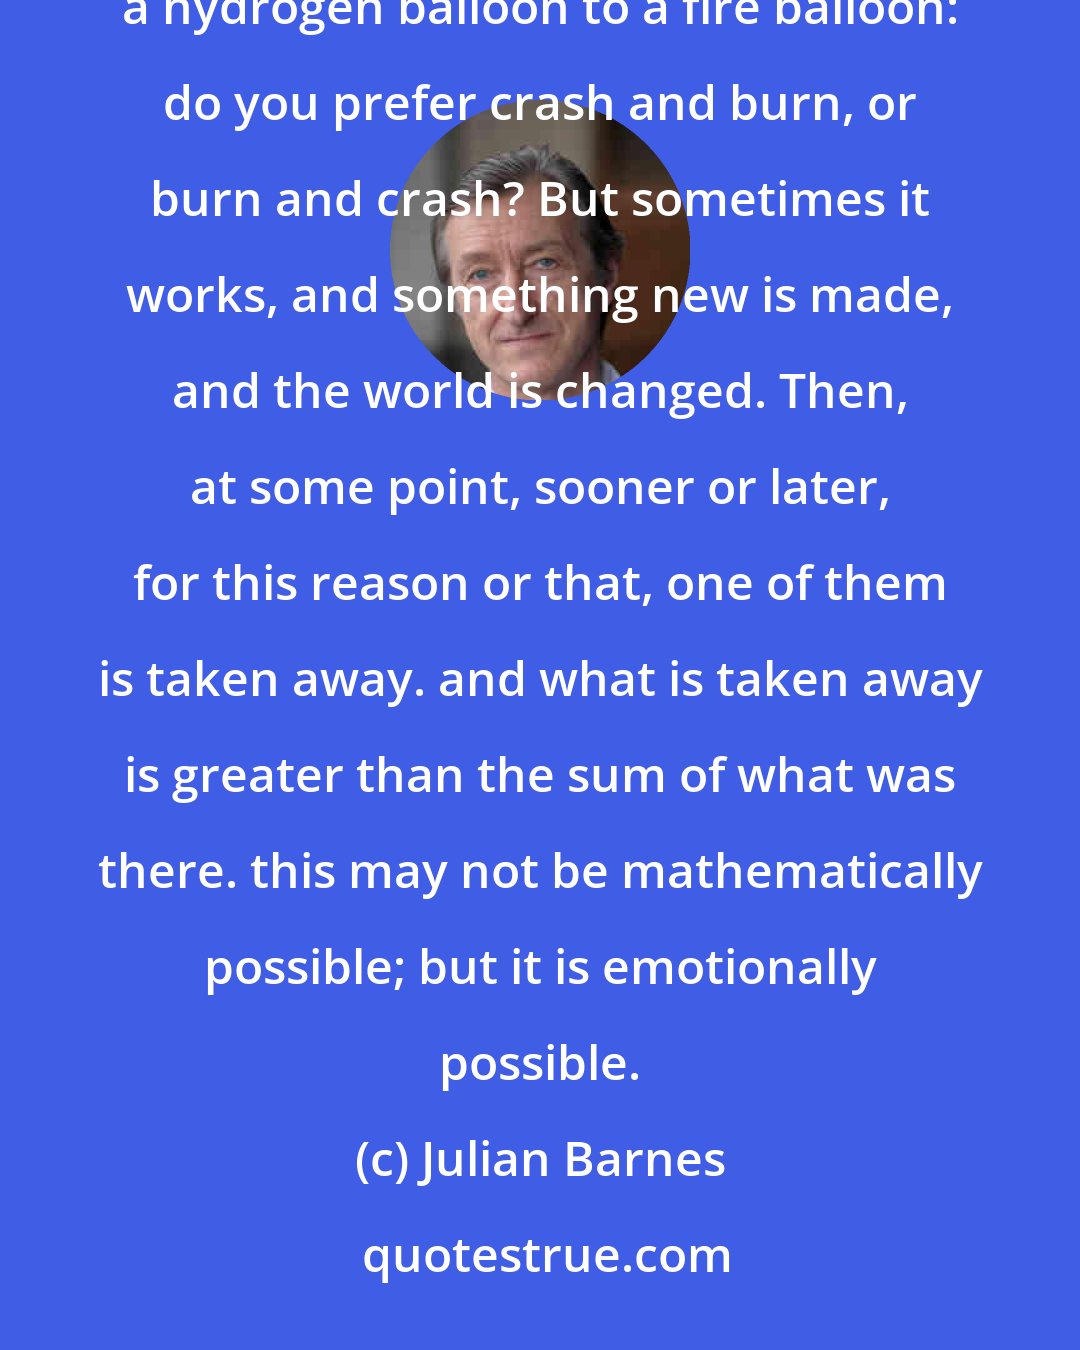 Julian Barnes: You put together two people who have not been put together before. Sometimes it is like that first attempt to harness a hydrogen balloon to a fire balloon: do you prefer crash and burn, or burn and crash? But sometimes it works, and something new is made, and the world is changed. Then, at some point, sooner or later, for this reason or that, one of them is taken away. and what is taken away is greater than the sum of what was there. this may not be mathematically possible; but it is emotionally possible.